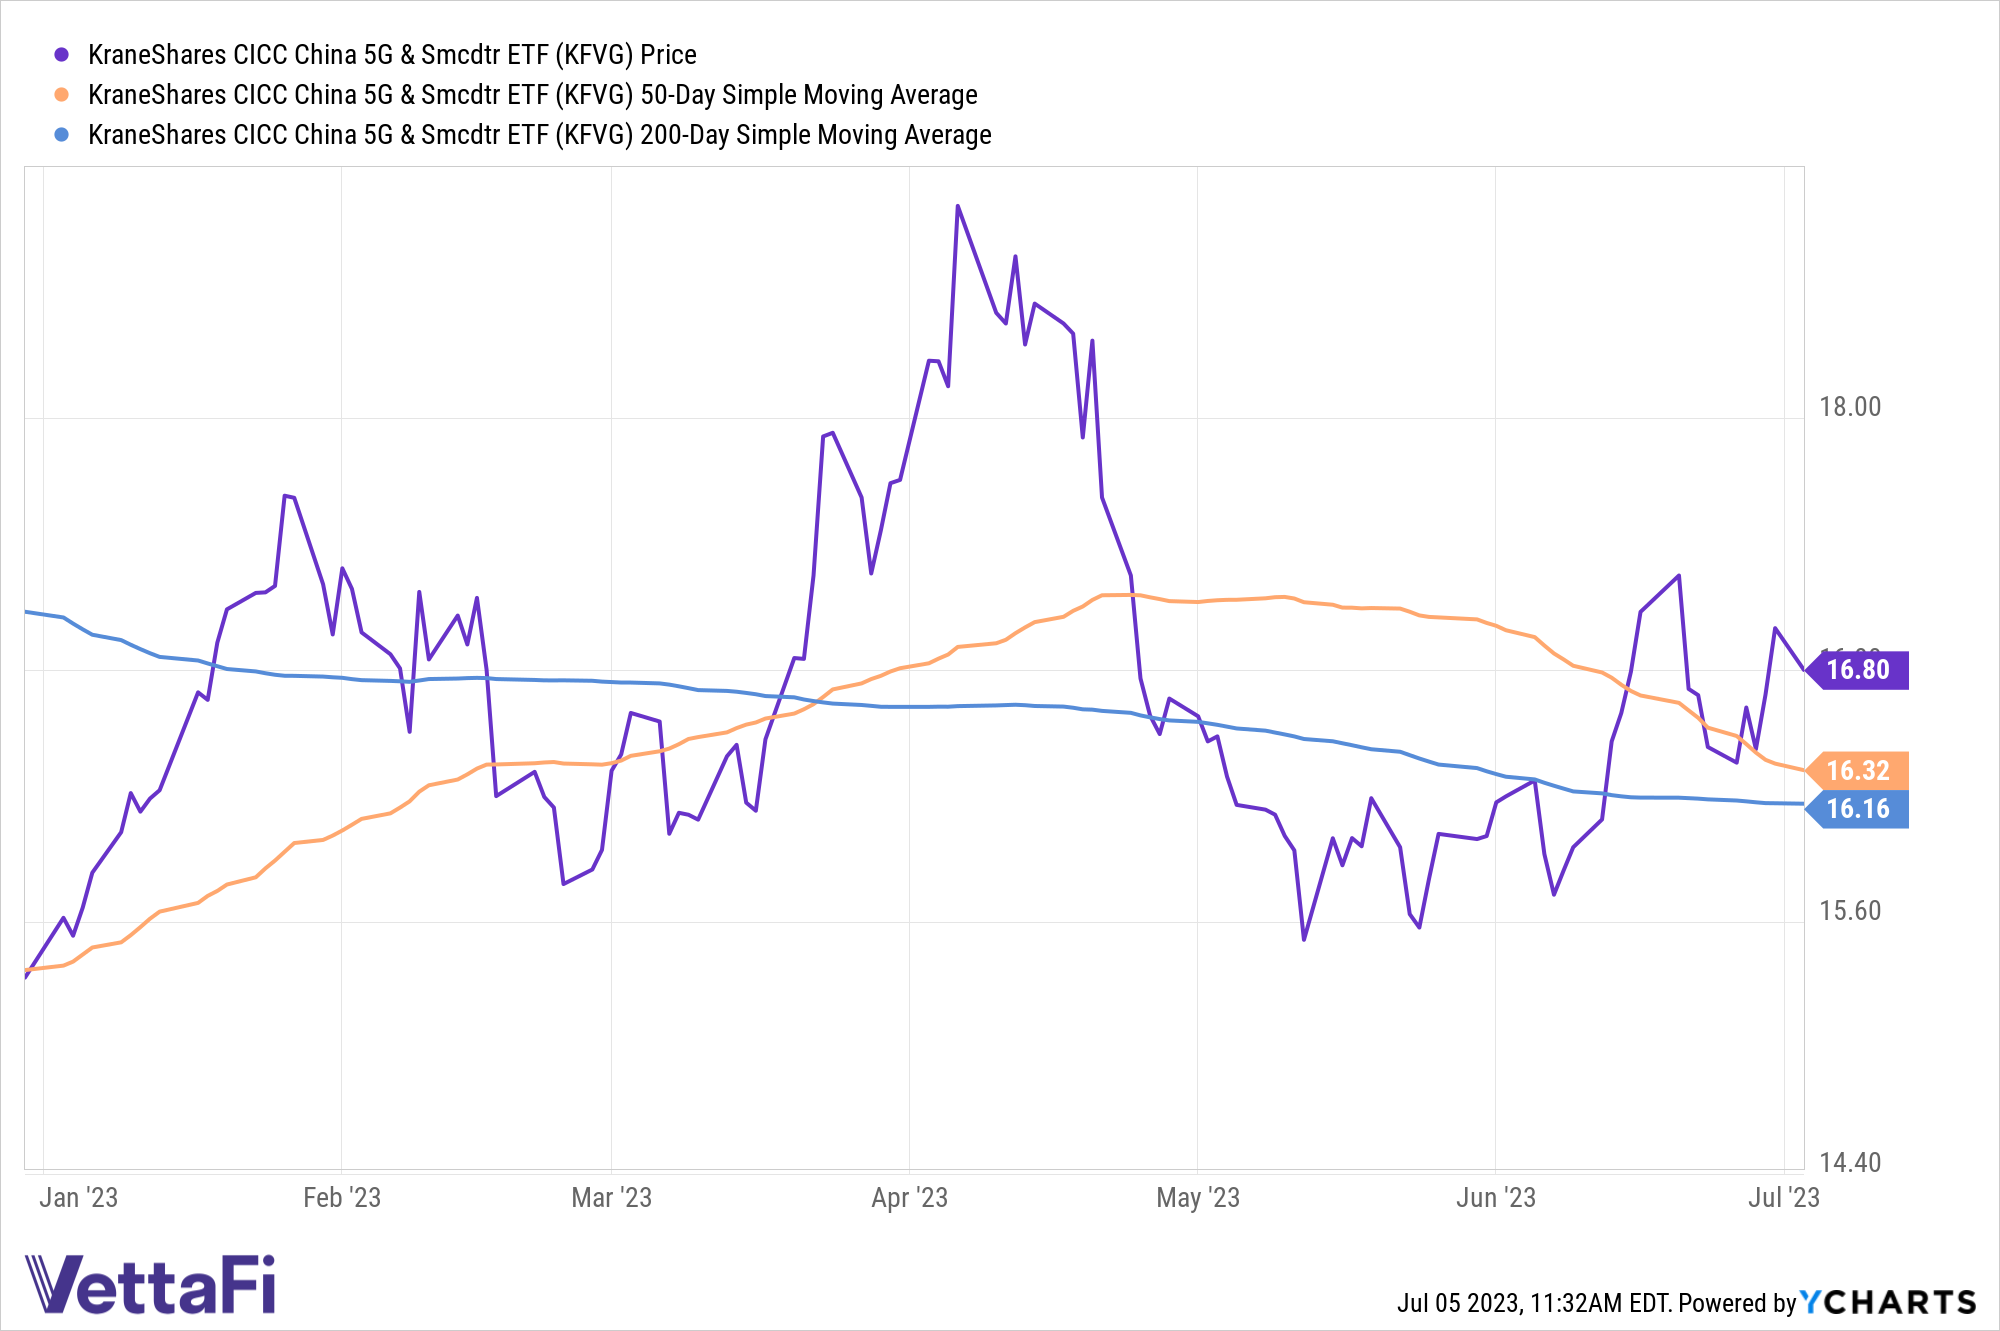 Price chart of KFVG 16.80 compared to its 50-day SMA of 16.32 and 200-day SMA of 16.16 YTD. 